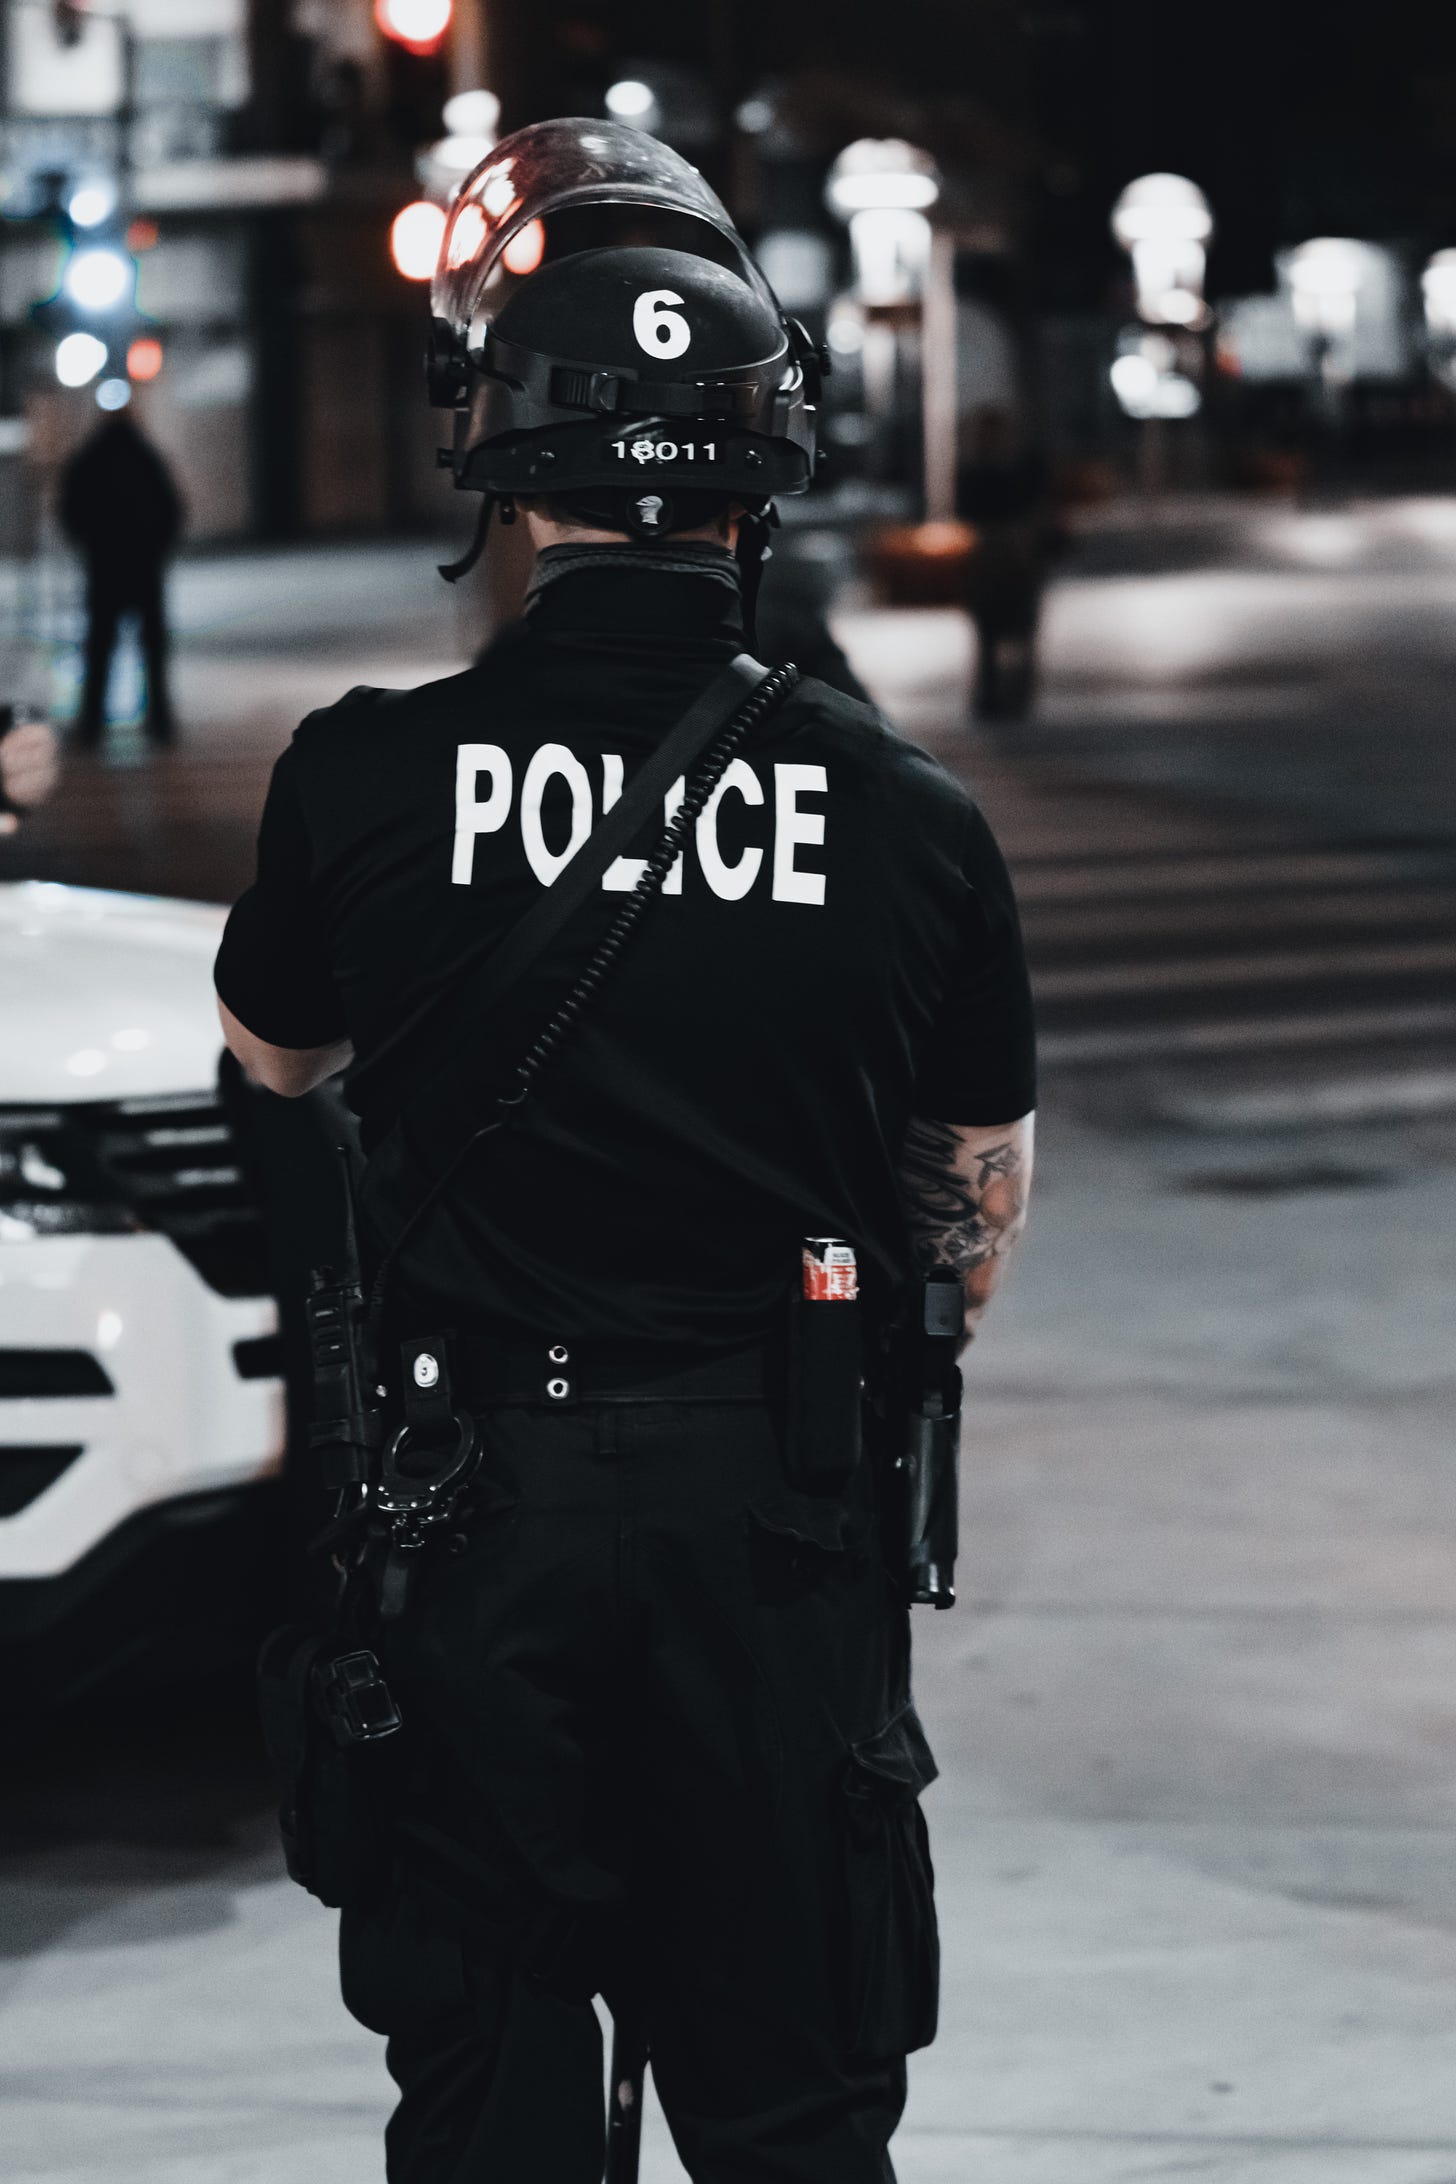 a police officer wearing a helmet facing away from the camera on a dark city street